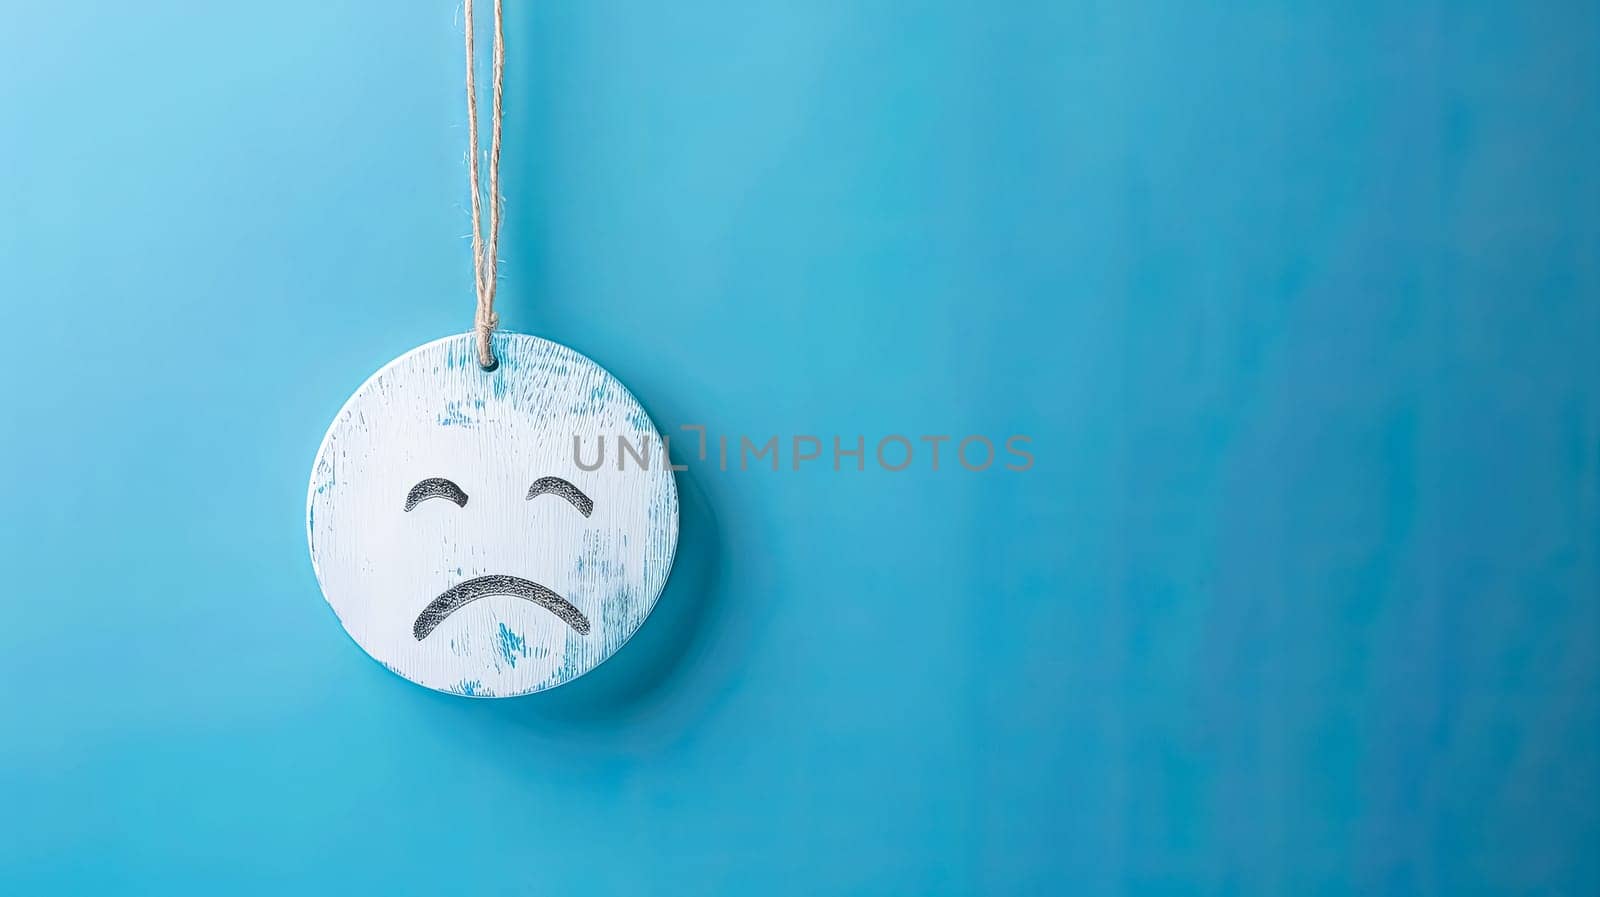 Sad Face Expression on Hanging Round Wooden Sign Against Blue Background by Edophoto